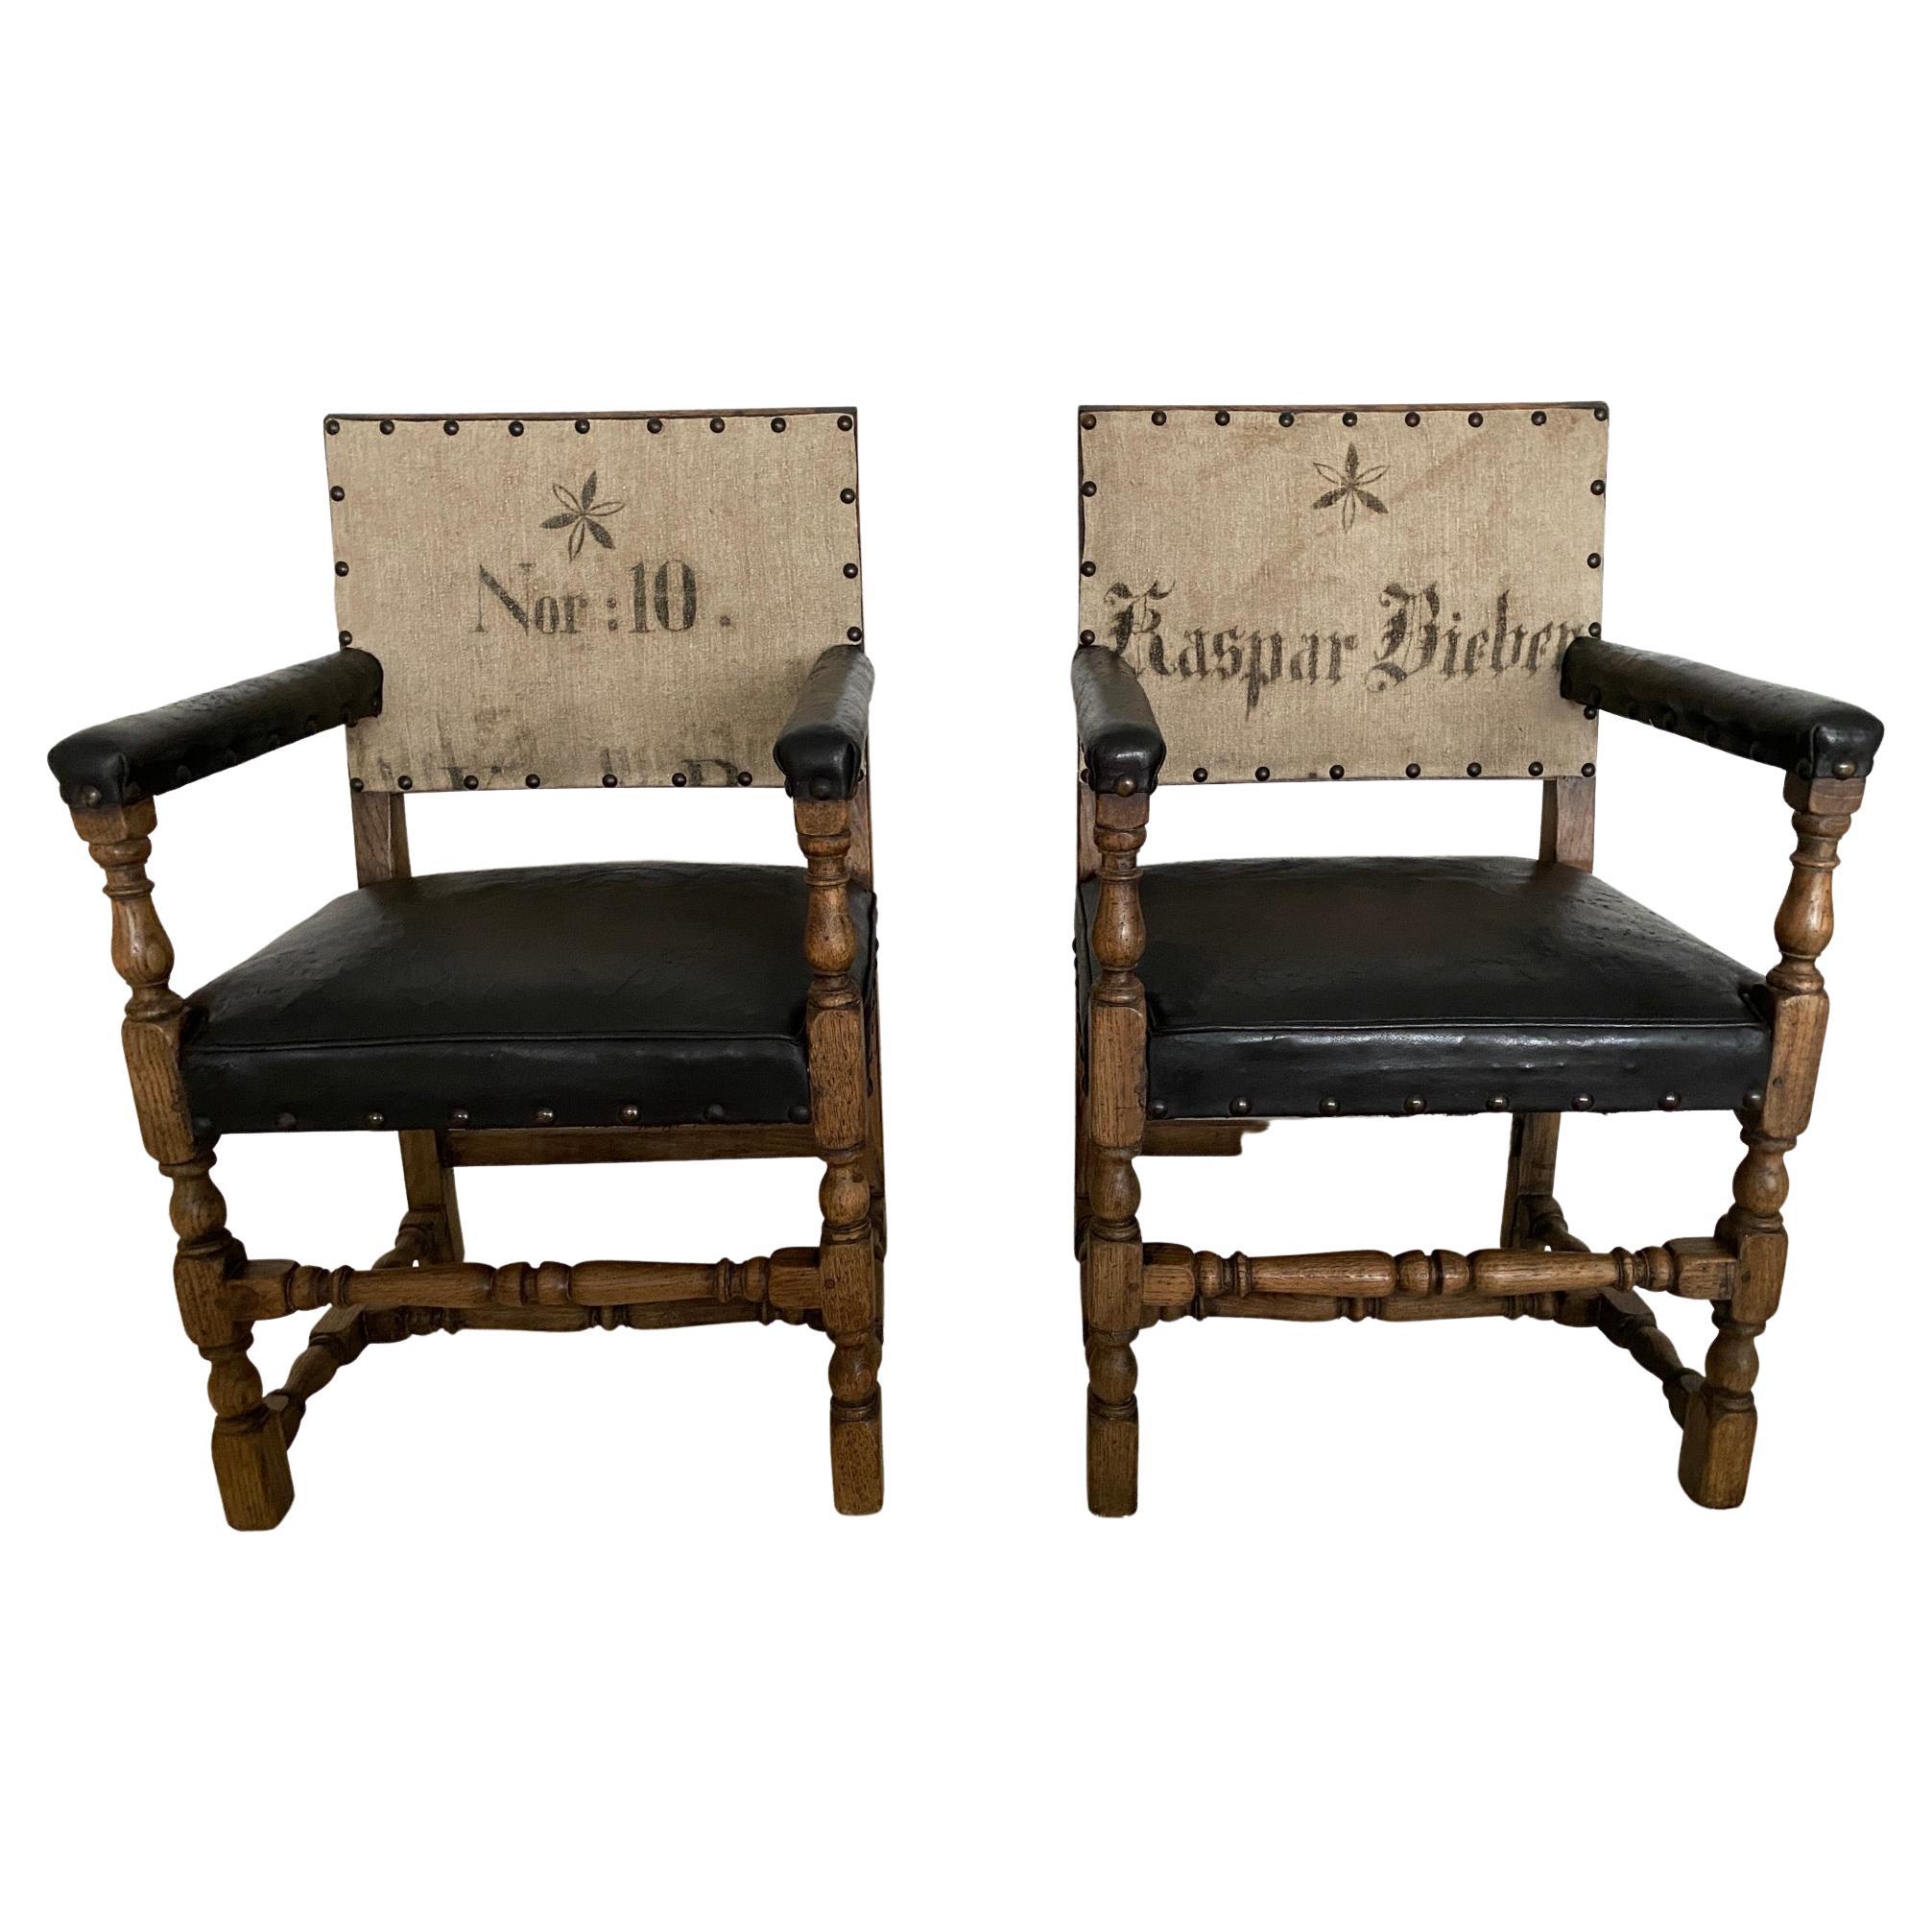 Pair of Antique Renaissance Style Throne Arm Chairs